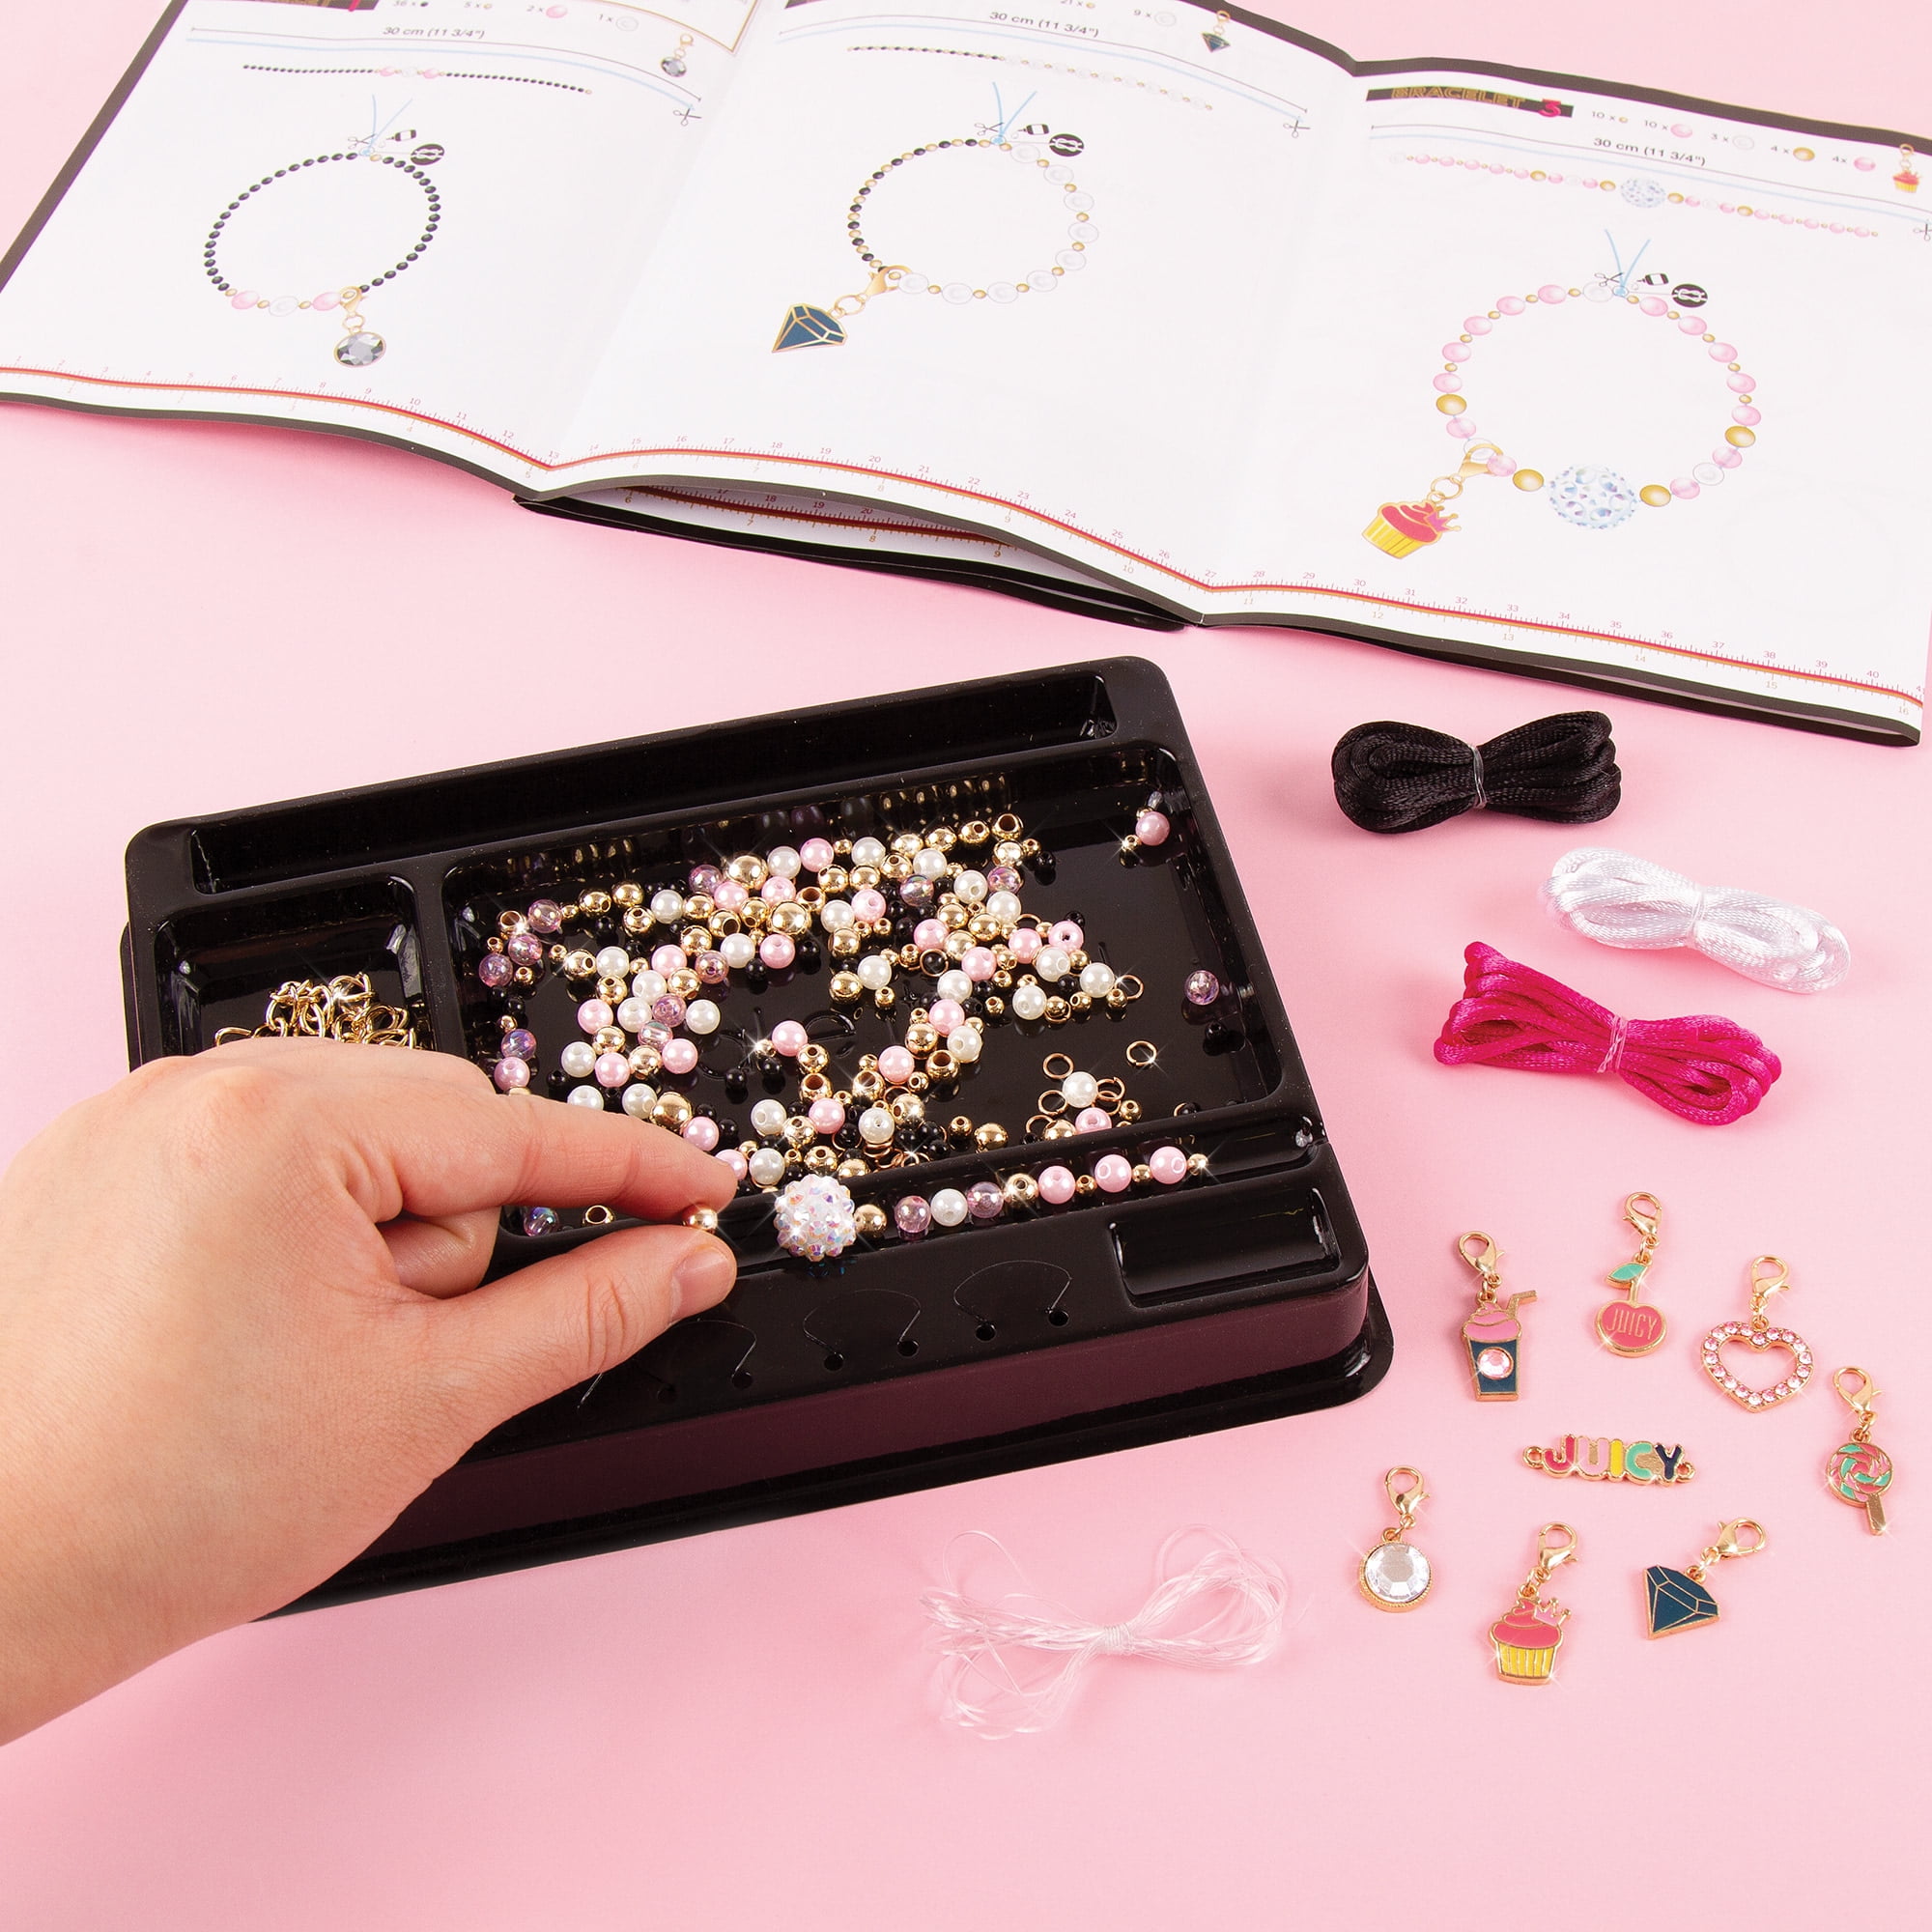 NEW Juicy Couture Perfectly Pink 8 Bracelet Making Kit Gold Charms 185 Pcs  CUTE